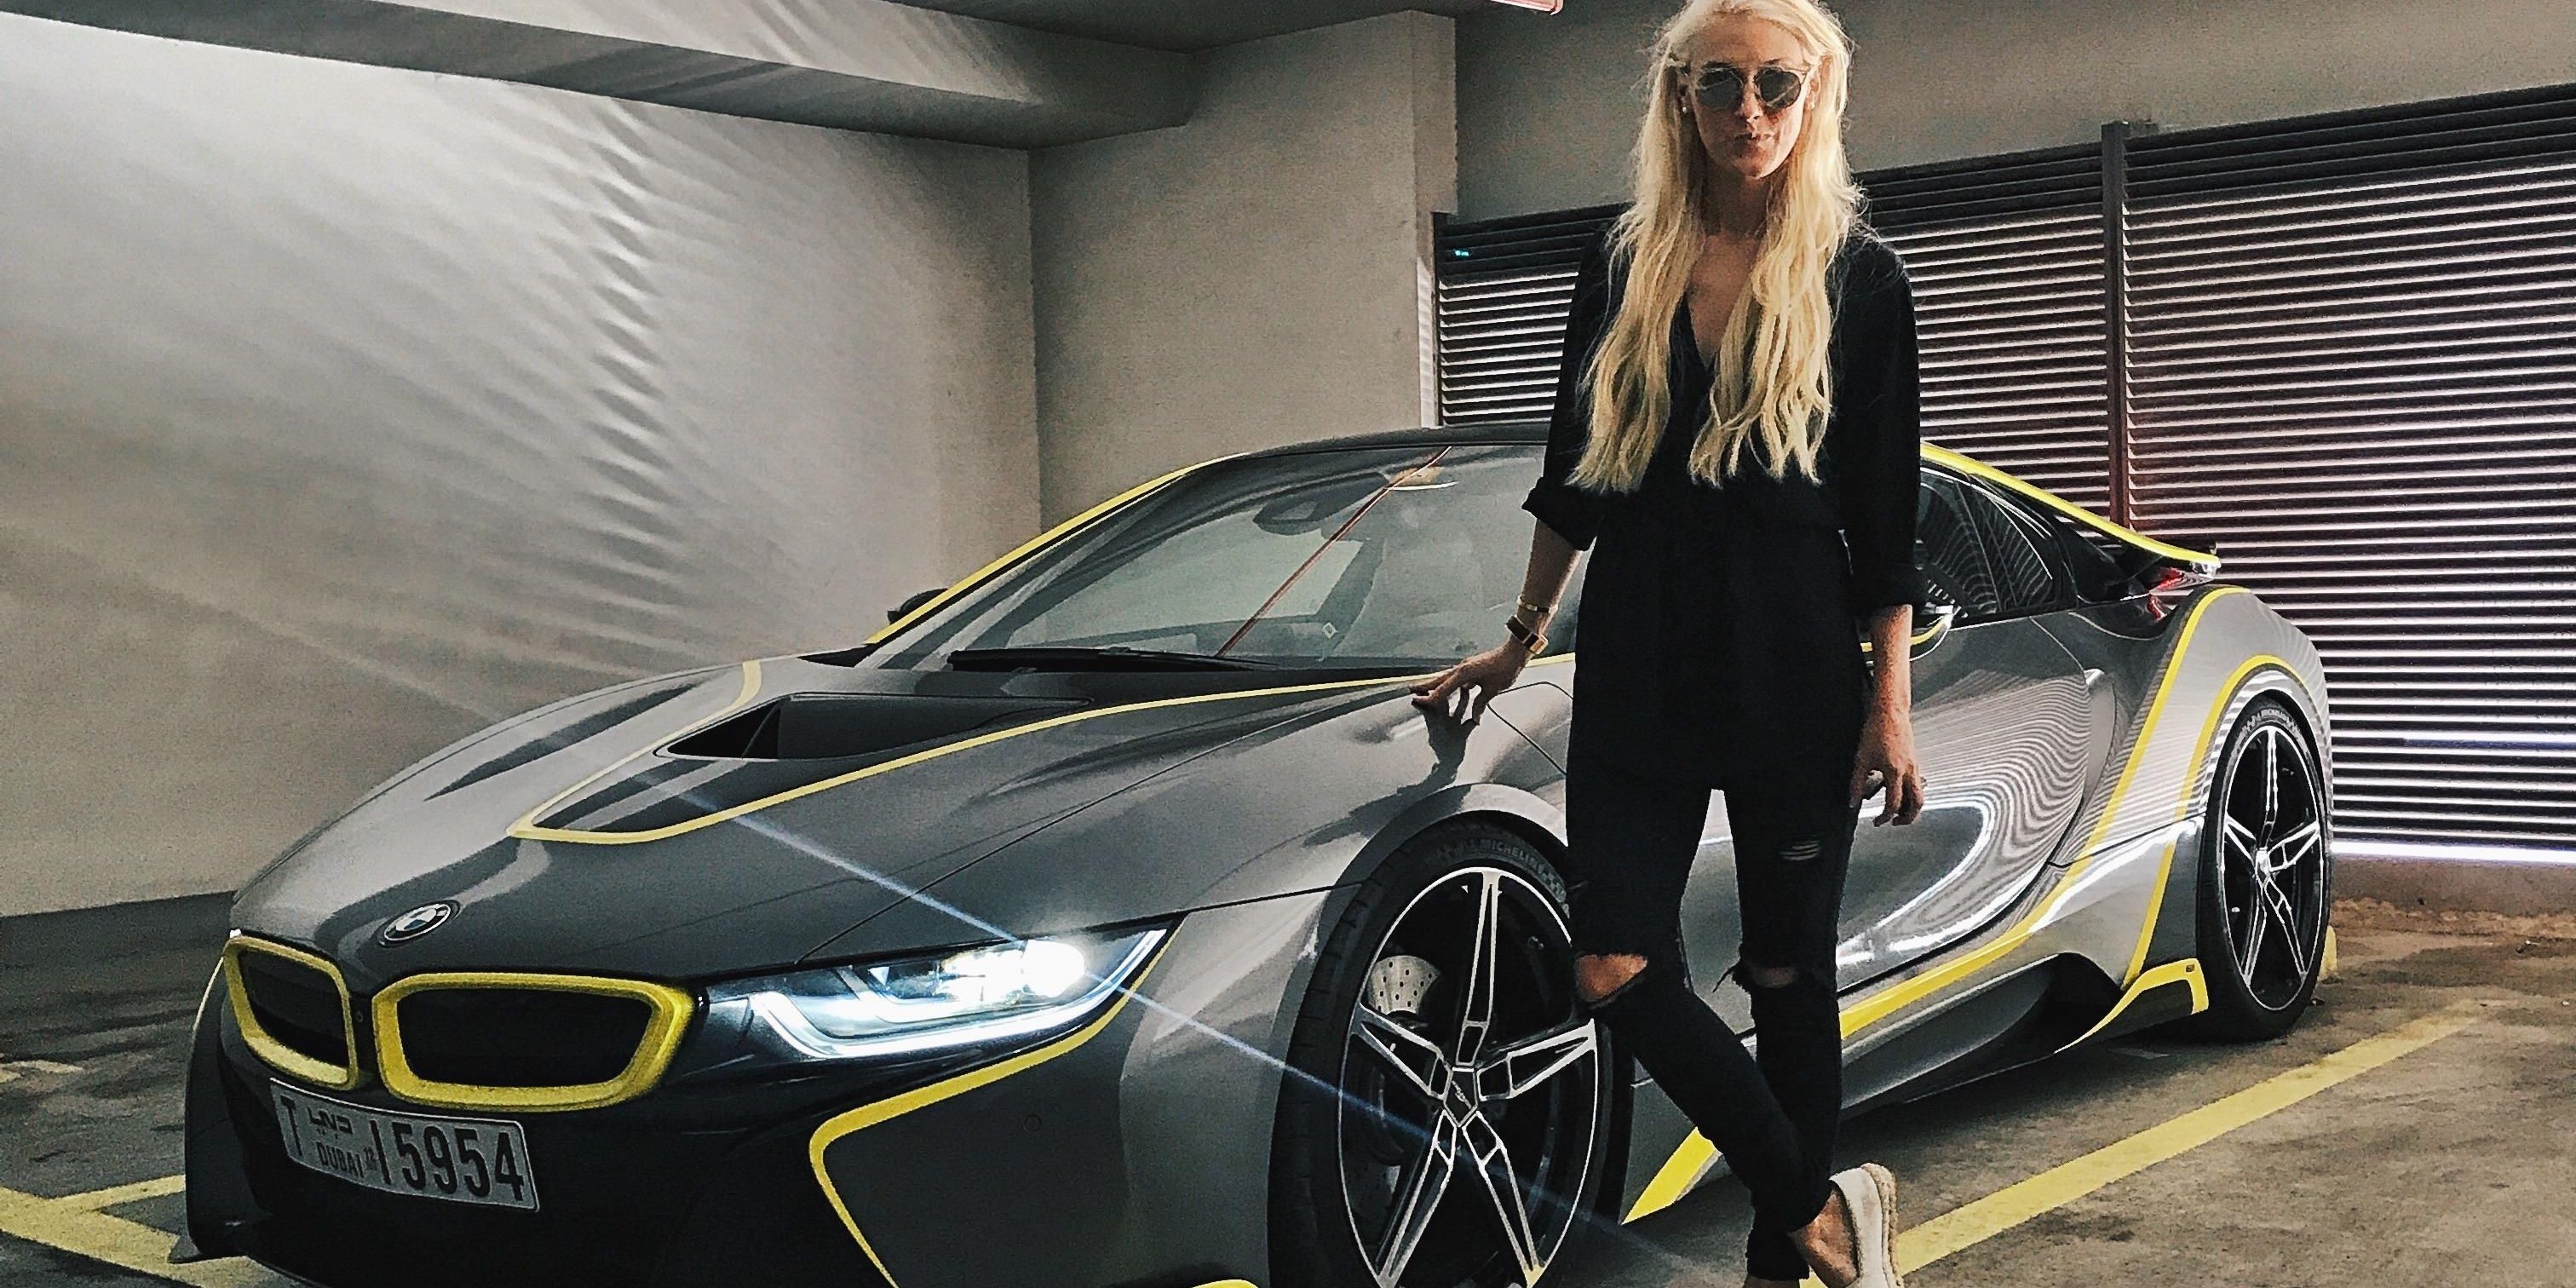 Supercar Blondie and Her BMW i8